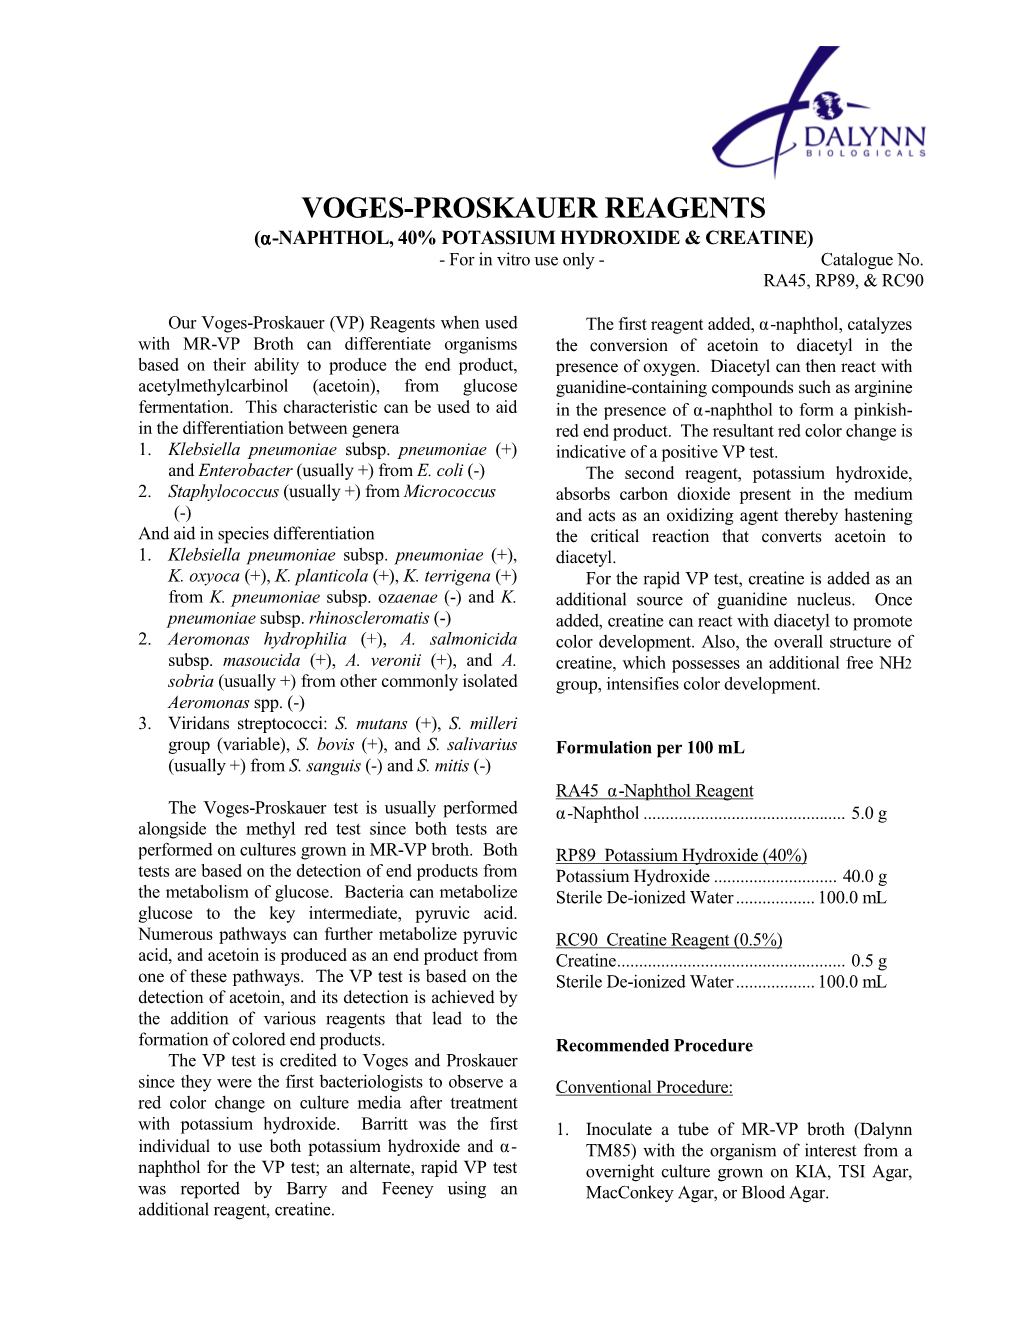 VOGES-PROSKAUER REAGENTS (Ααα-NAPHTHOL, 40% POTASSIUM HYDROXIDE & CREATINE) - for in Vitro Use Only - Catalogue No